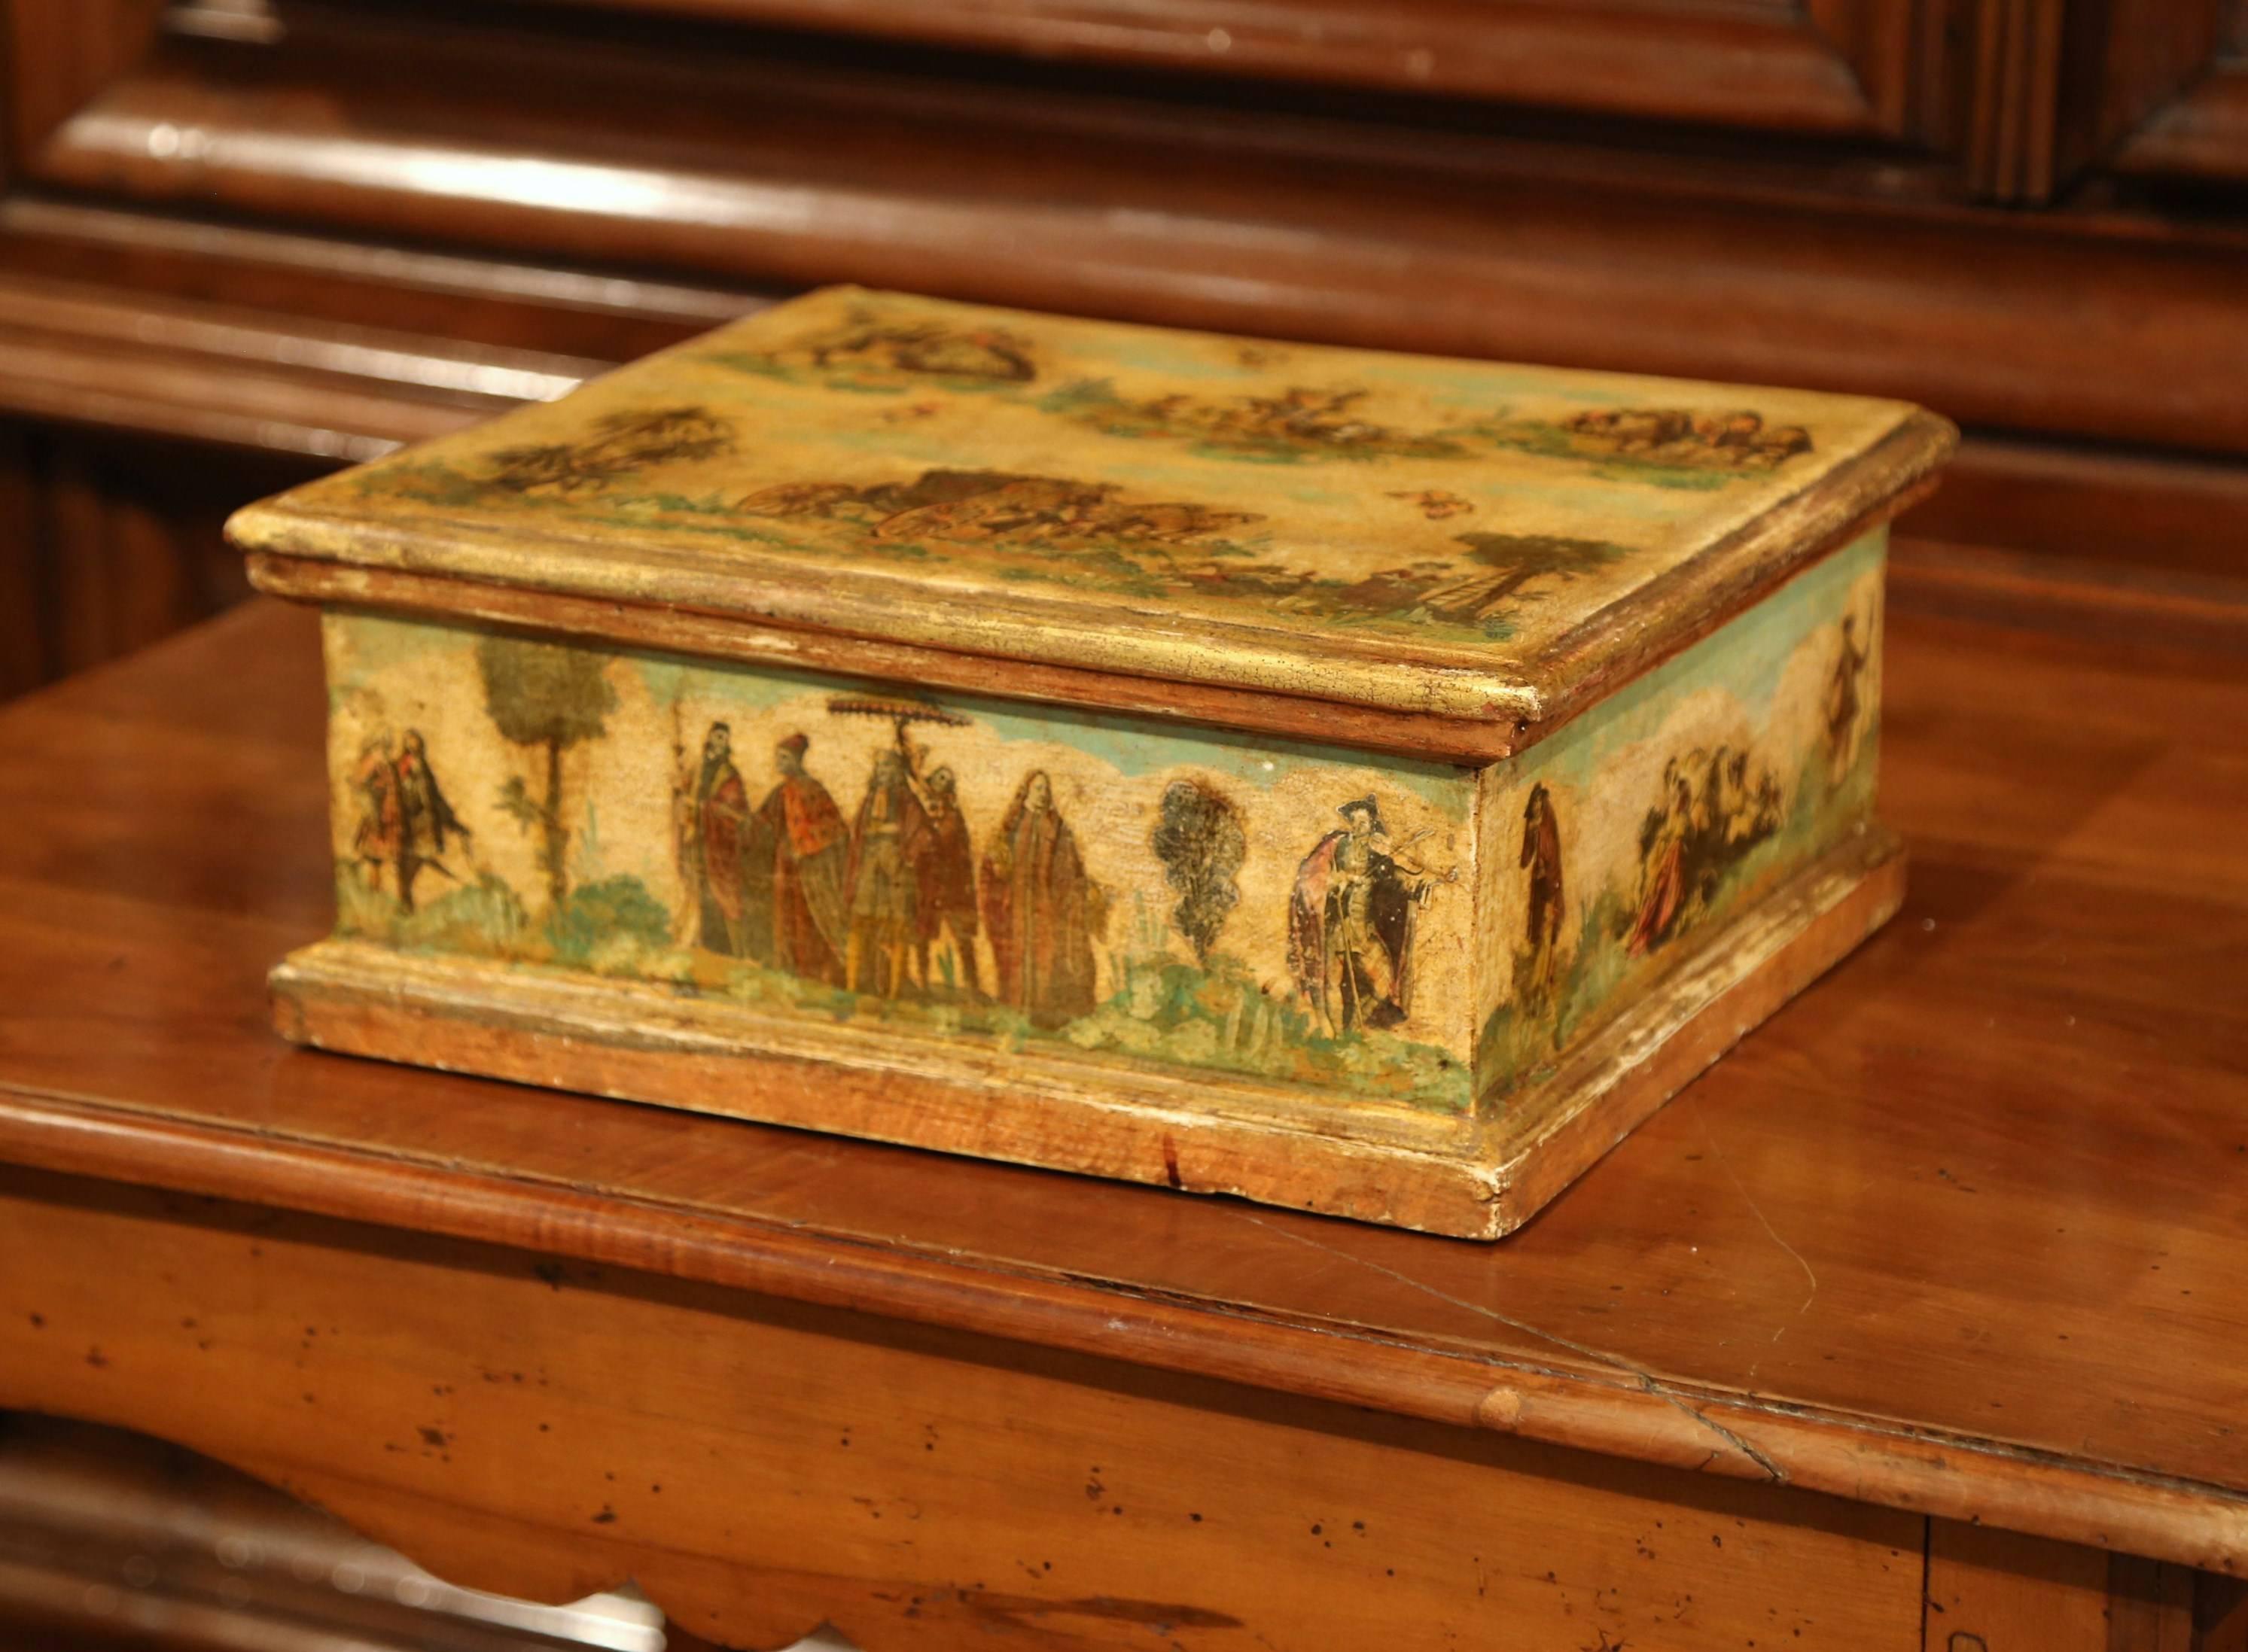 This elegant antique box was crafted in Italy, circa 1850. The colorful, detailed box features hand painted scenes of people with horses and butterflies. The rectangular box has its original painted finish in a yellow and green palette embellished